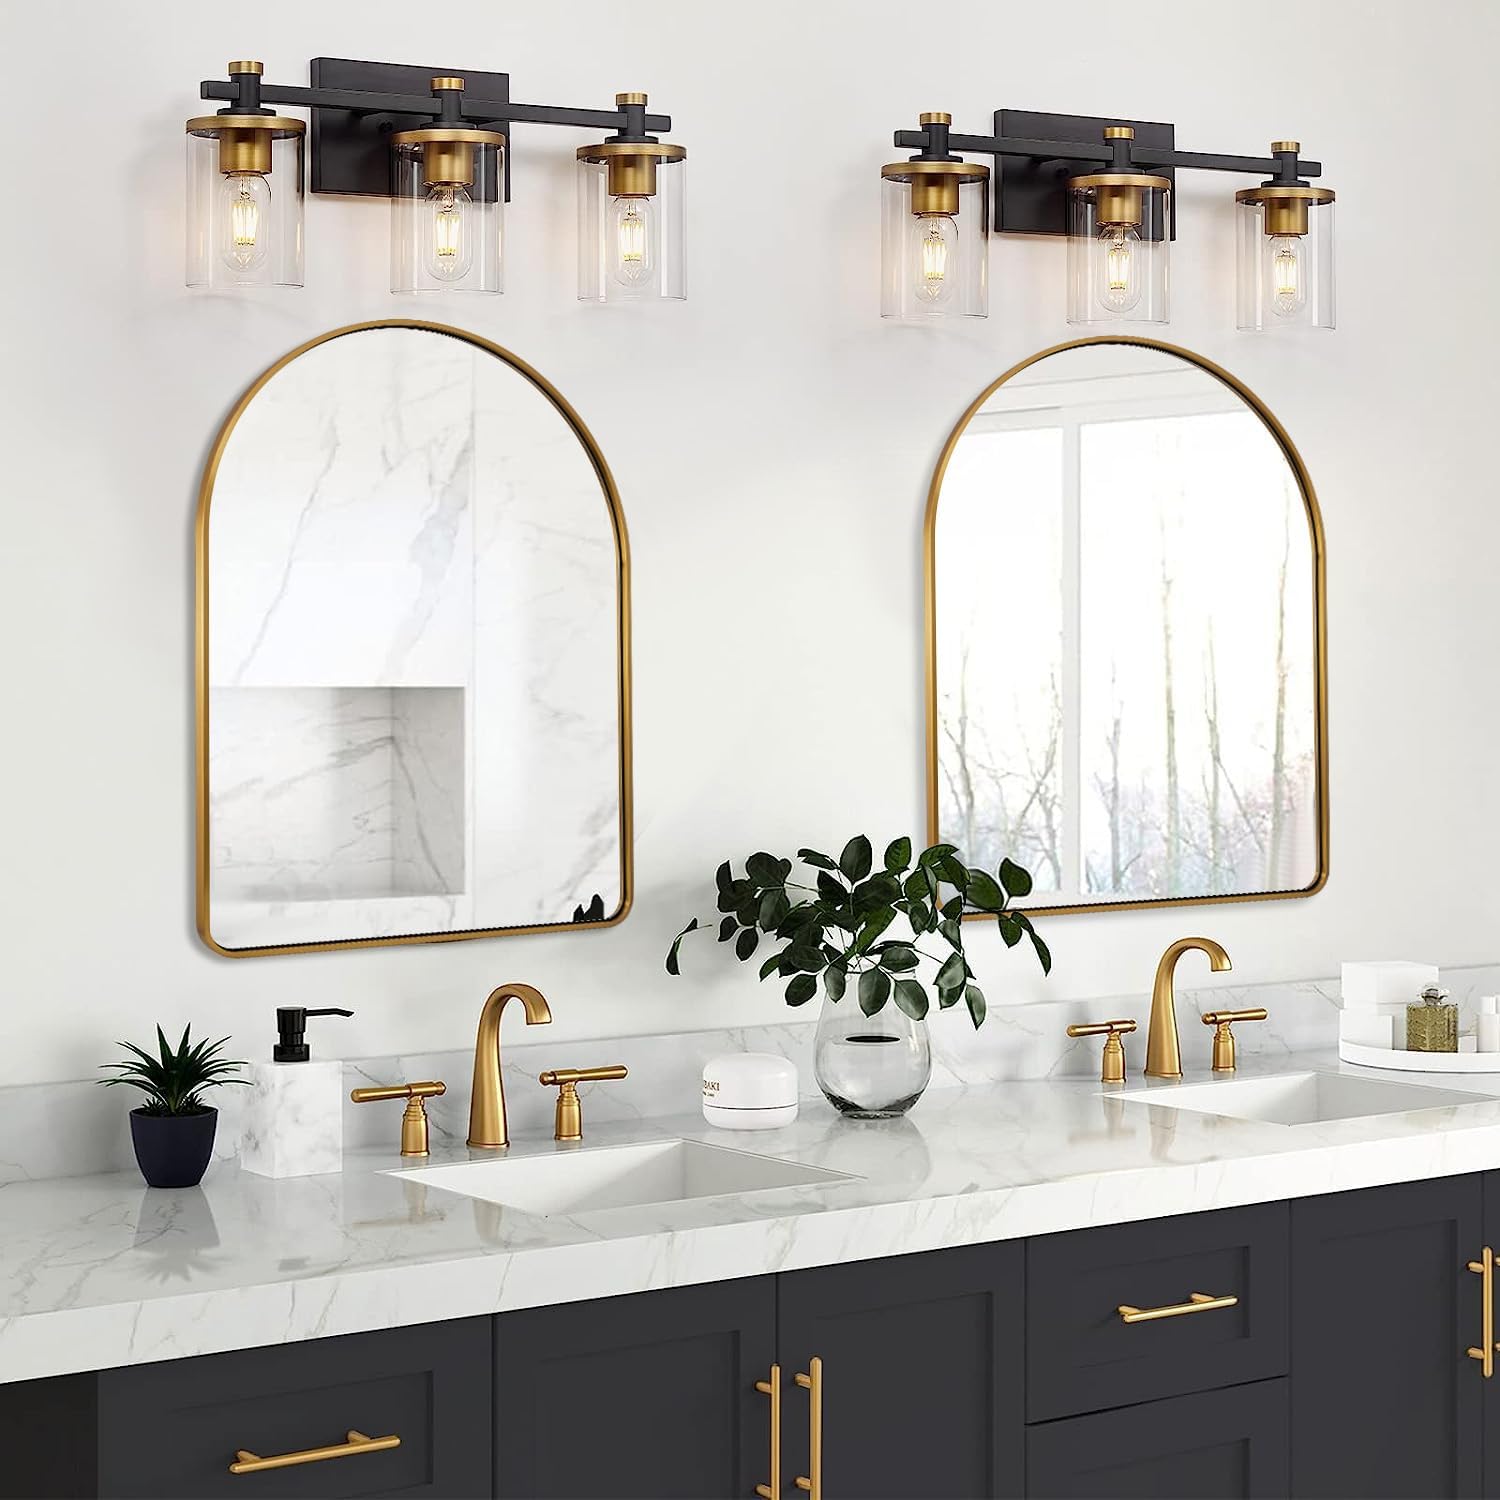 Bold Metal Framed Arched   Wall Mirrors for Bathroom/ Living Room/Entry